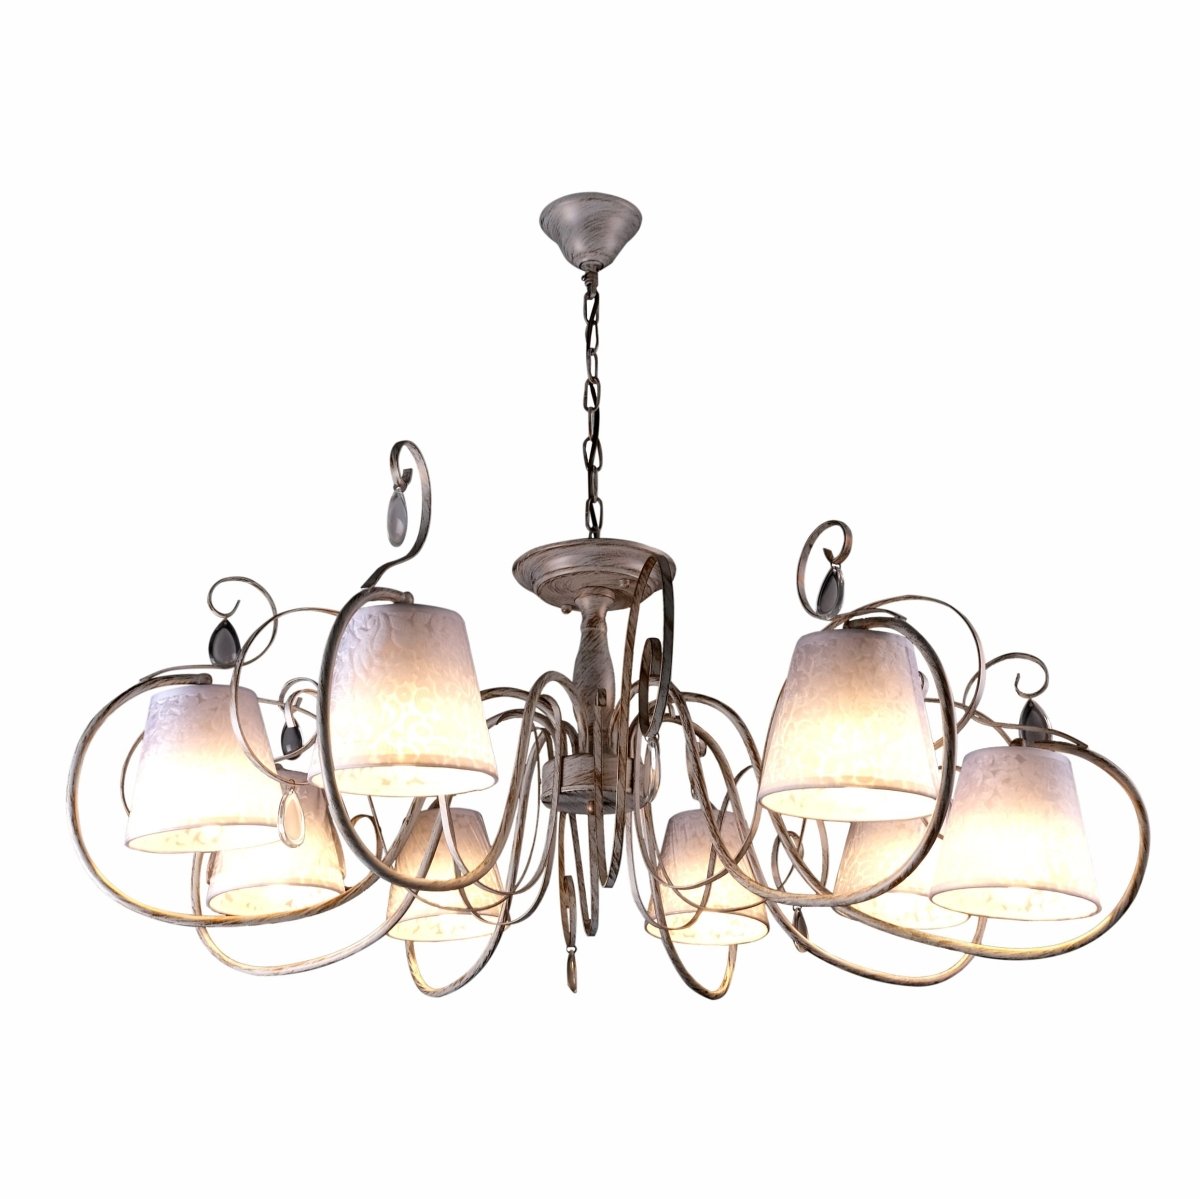 Main image of Creamy White Shade Rice White Gold Brushed 8 Arm Chandelier with 8xE14 Fitting | TEKLED 158-17824